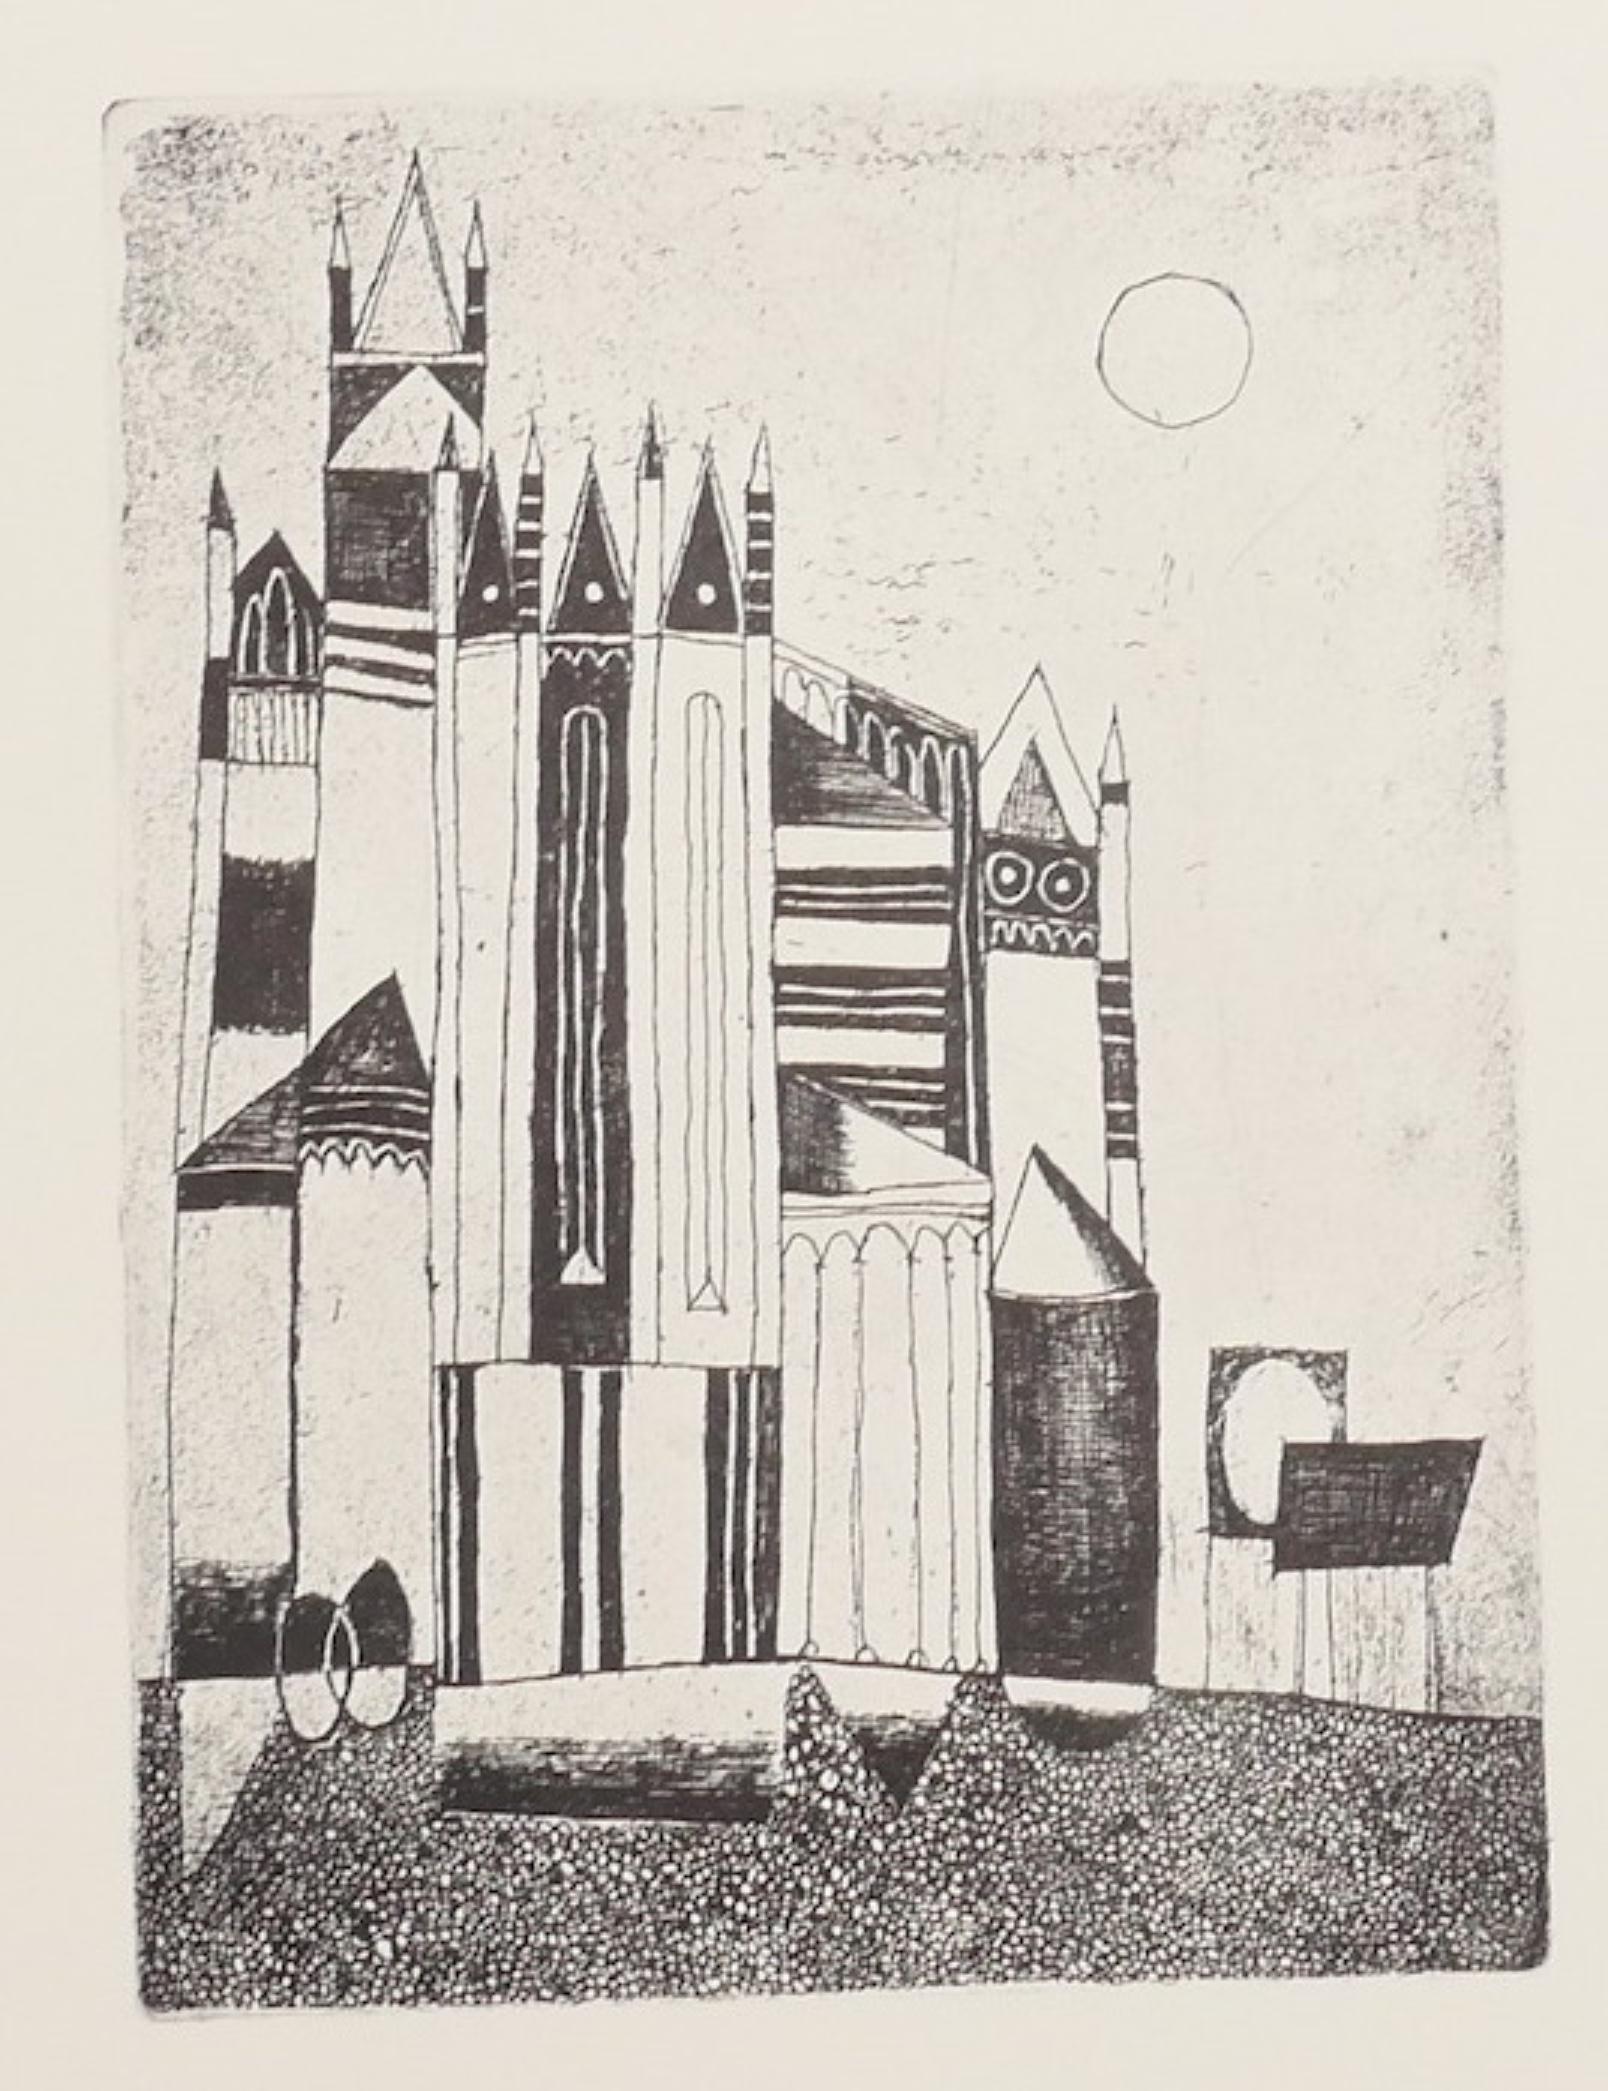 The Cathedral is an original offset print on ivory-colored paper, realized by Franco Gentilini (Italian Painter, 1909-1981), in 1970s.

The state of preservation of the artwork is excellent.

Image Dimensions: 27 x 20 cm

Franco Gentilini (Italian